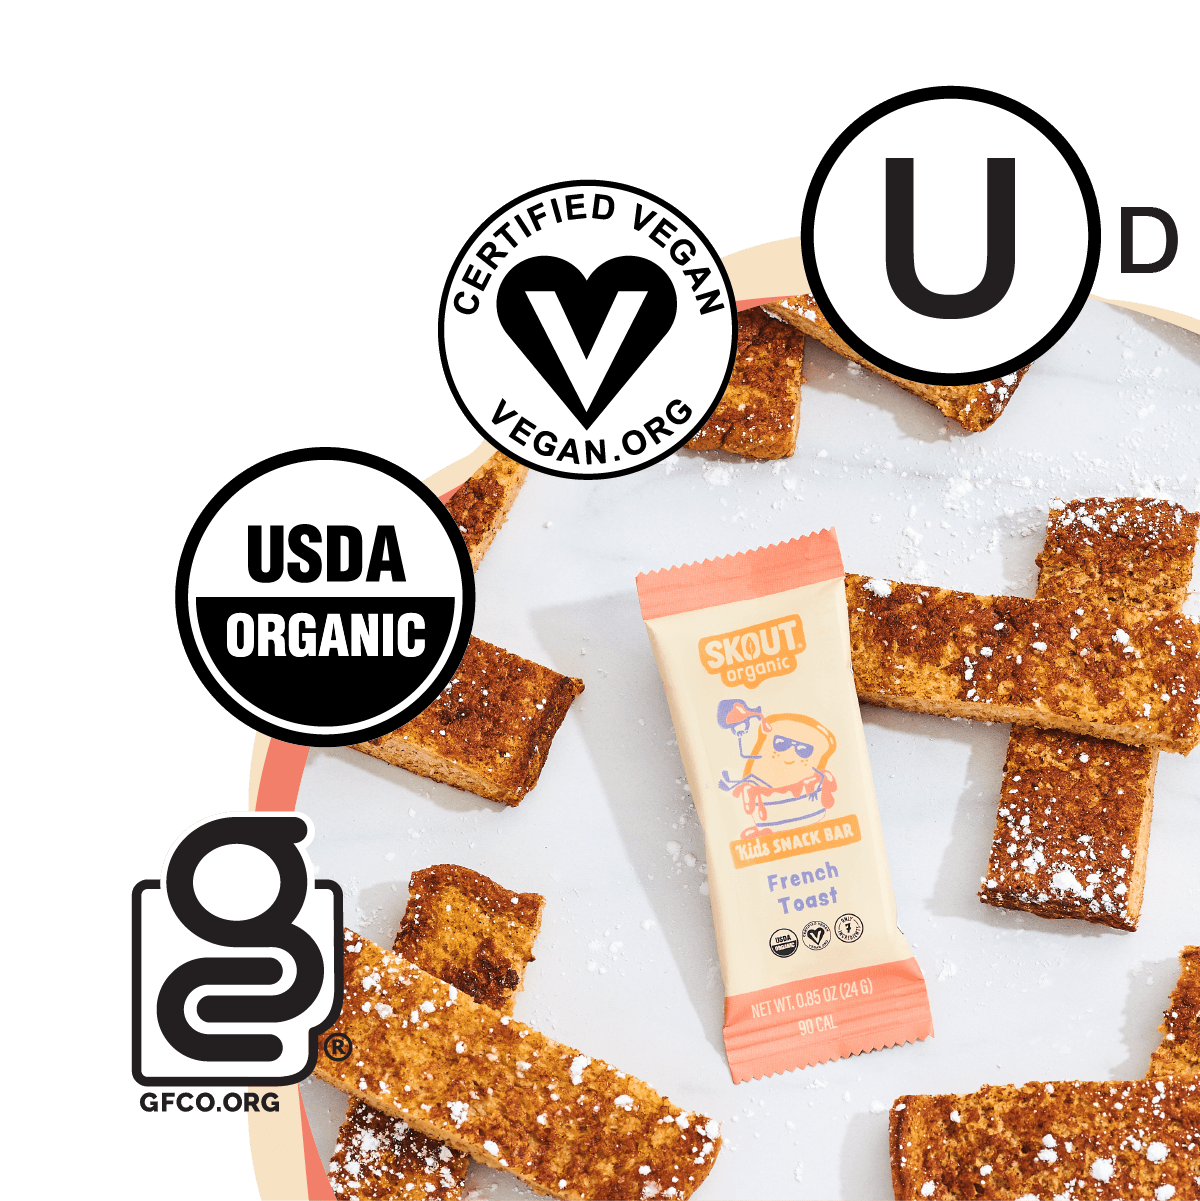 Skout Organic French Toast Kids Bar by Skout Organic